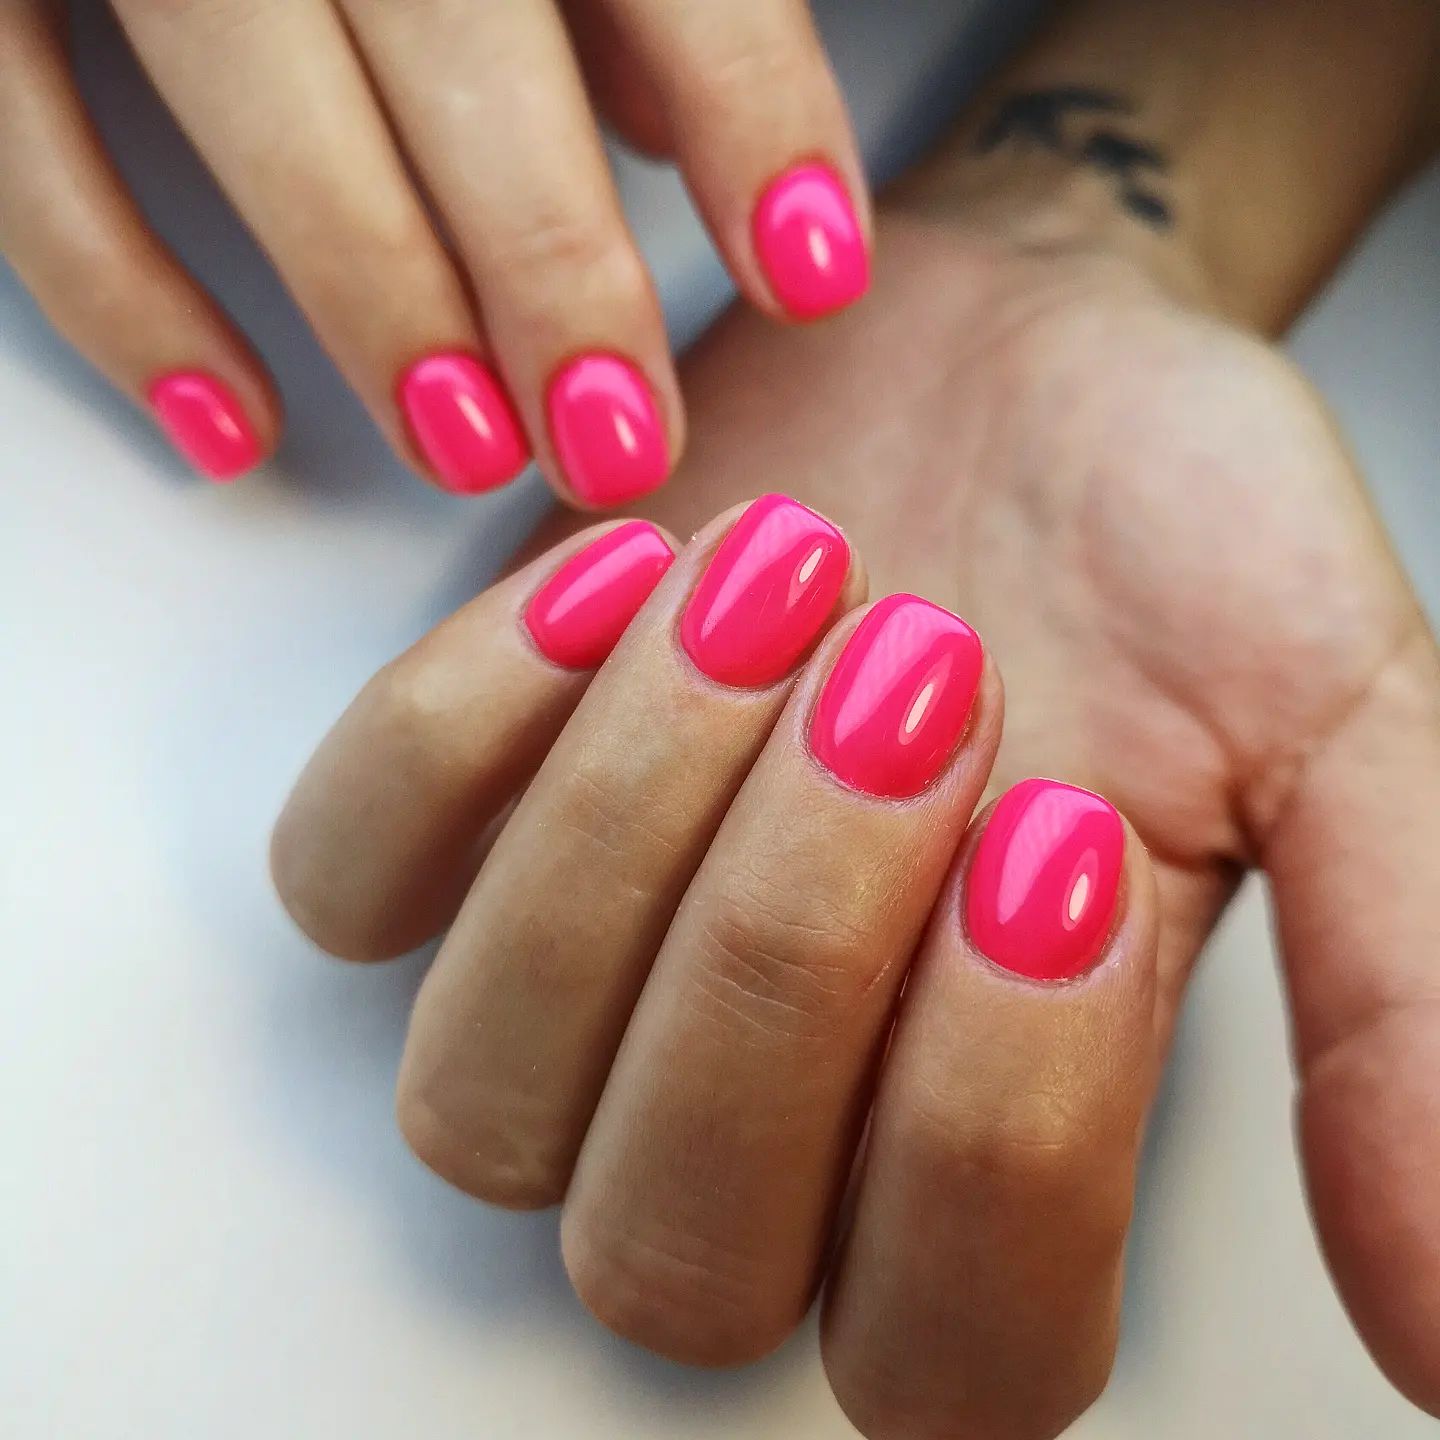 The fact that you have short nails doesn't mean that you can't look cool. By wearing a cute pink neon nails, you can achieve this.